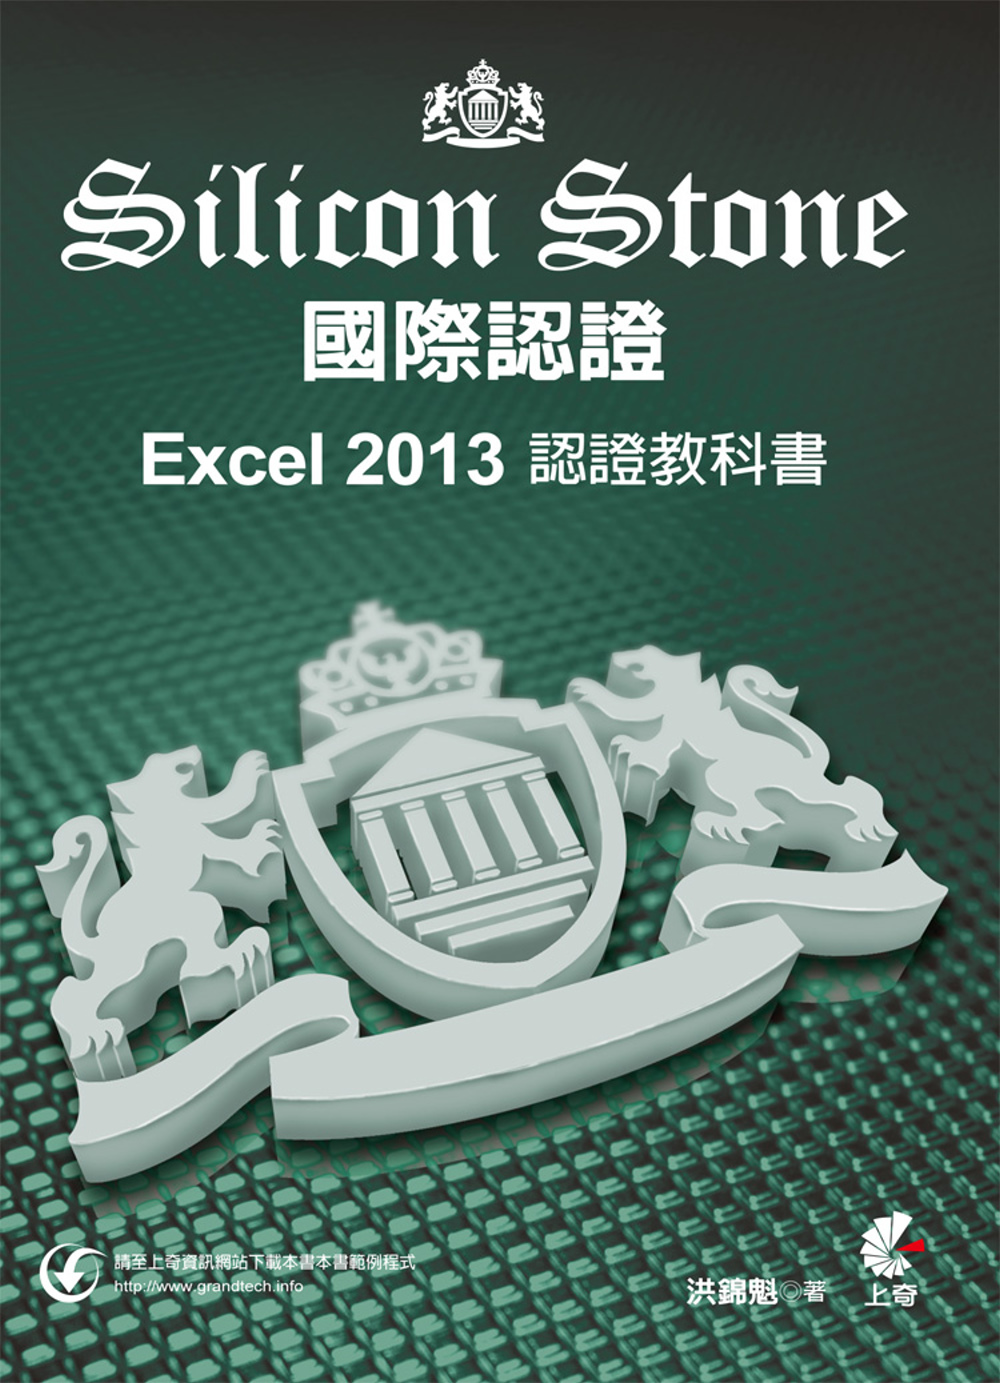 Excel 2013 Silicon Stone 認證教科書